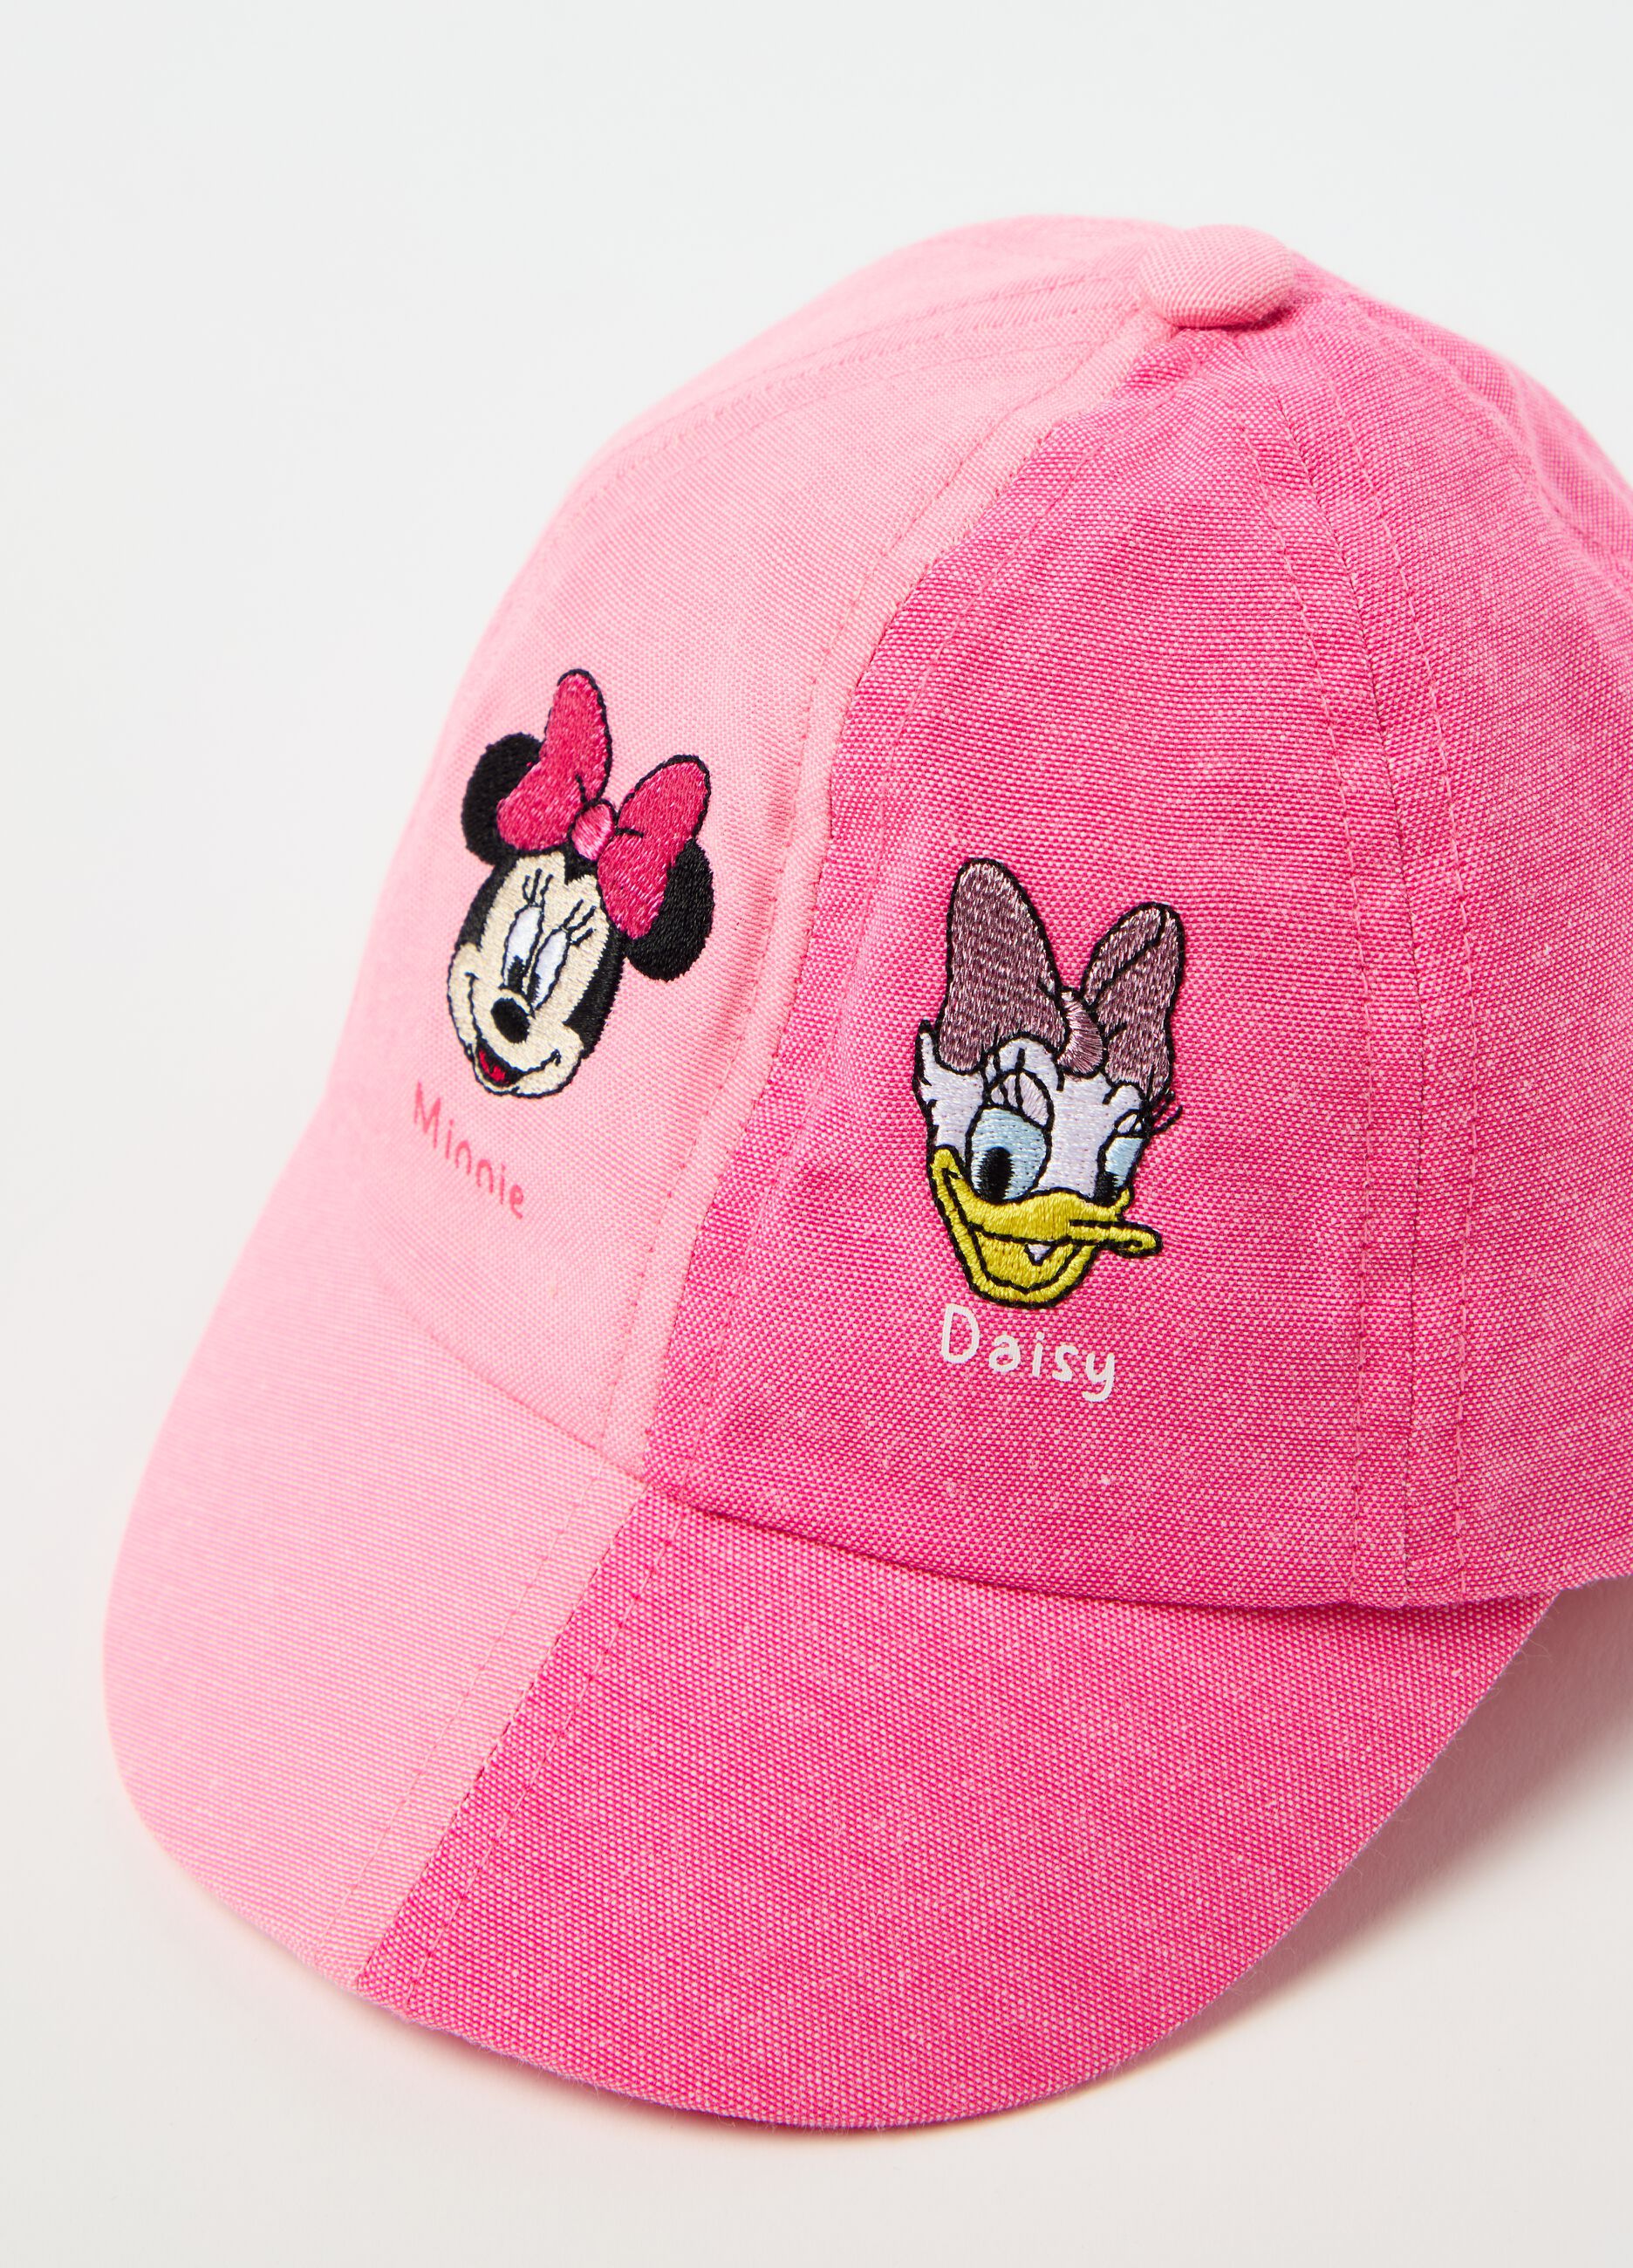 Baseball cap with Minnie Mouse and Daisy Duck embroidery